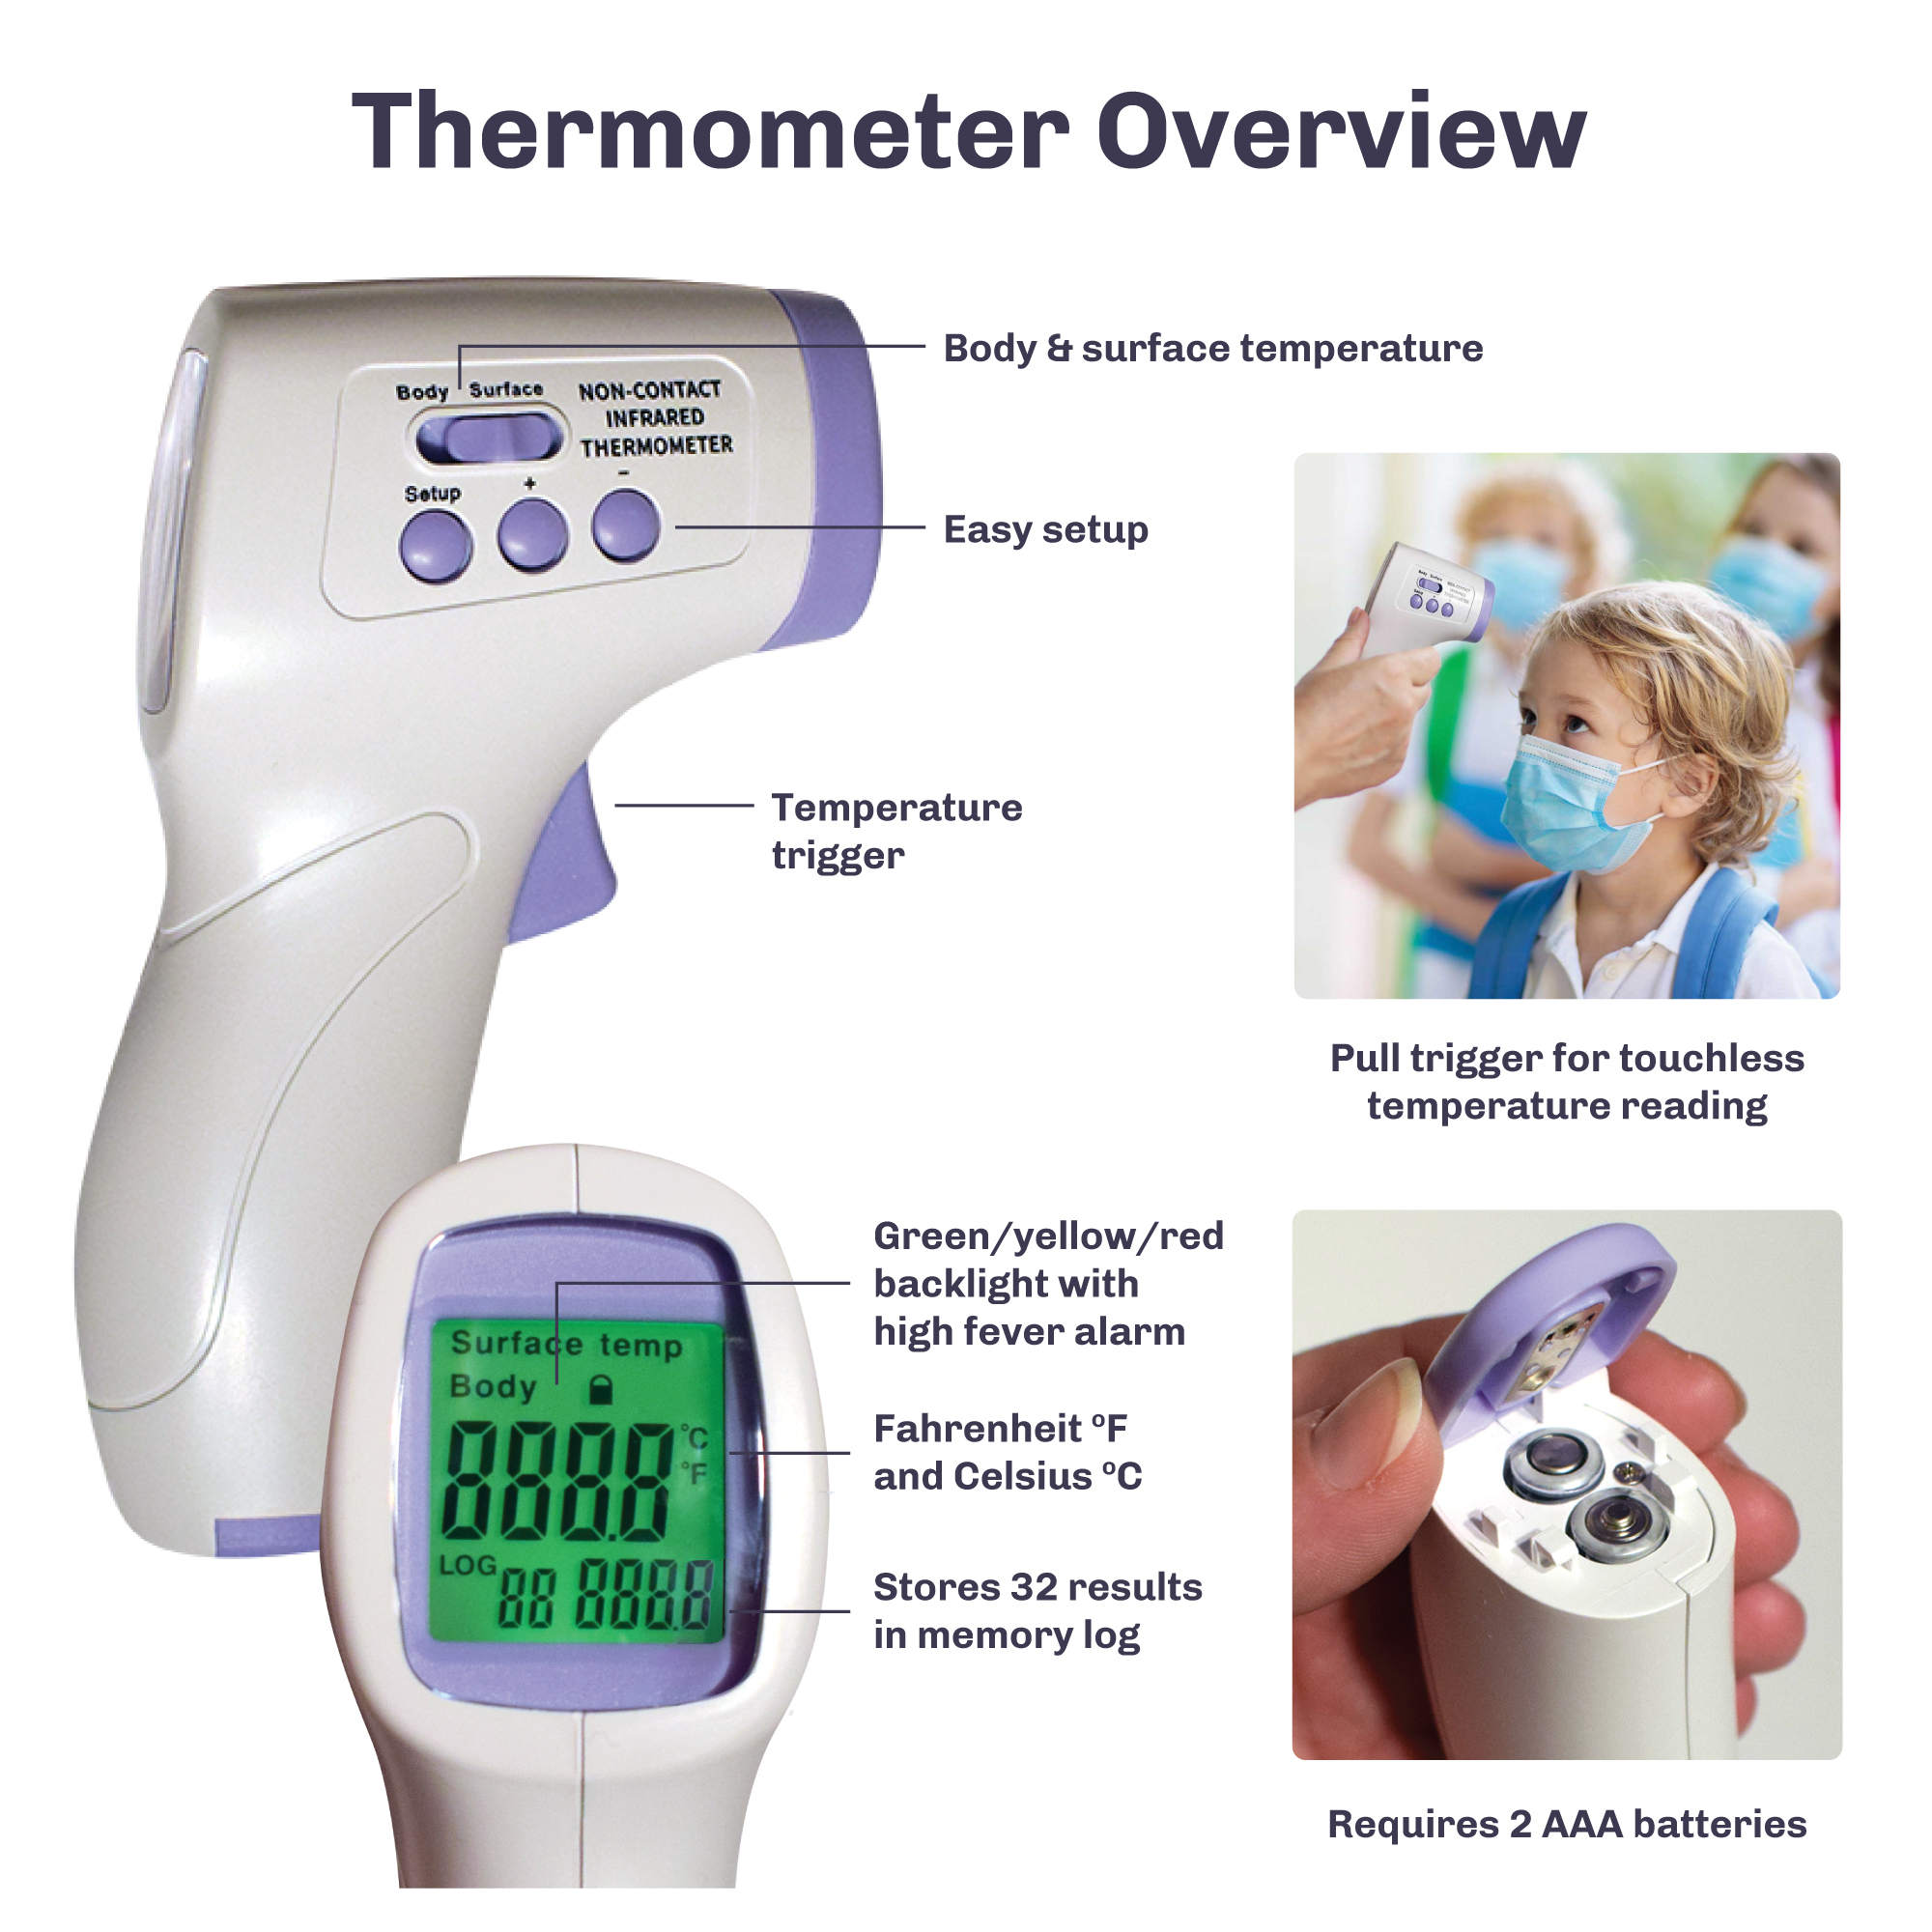 https://plumgroveinc.com/wp-content/uploads/Harborshield-thermometer-JRT-18-features-2000x2000-1.jpg